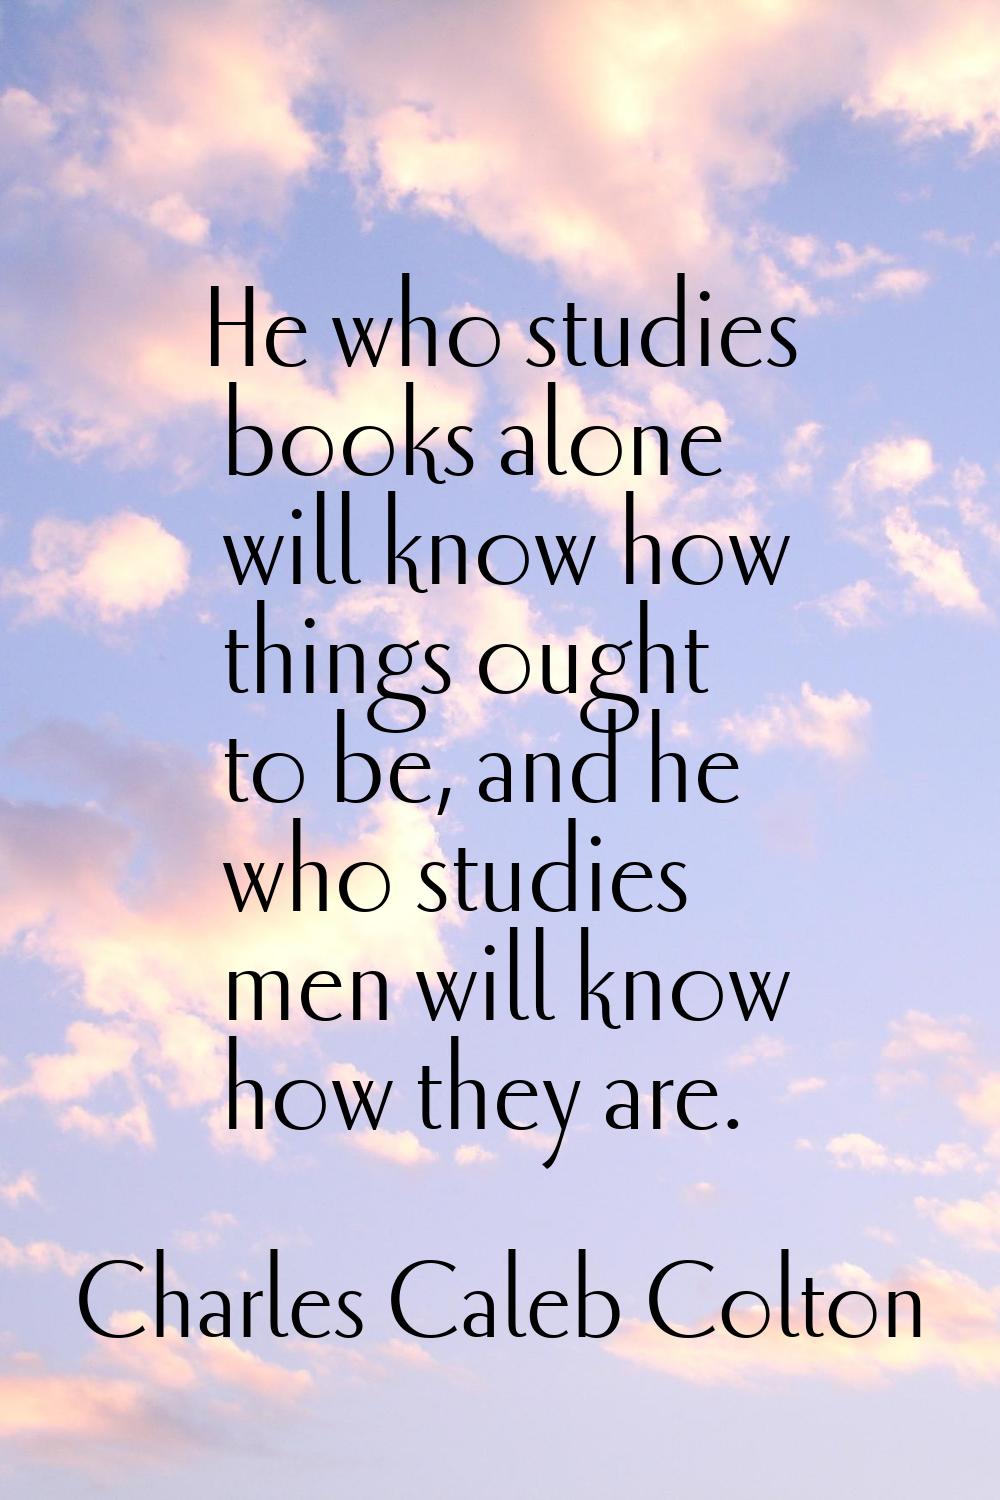 He who studies books alone will know how things ought to be, and he who studies men will know how t